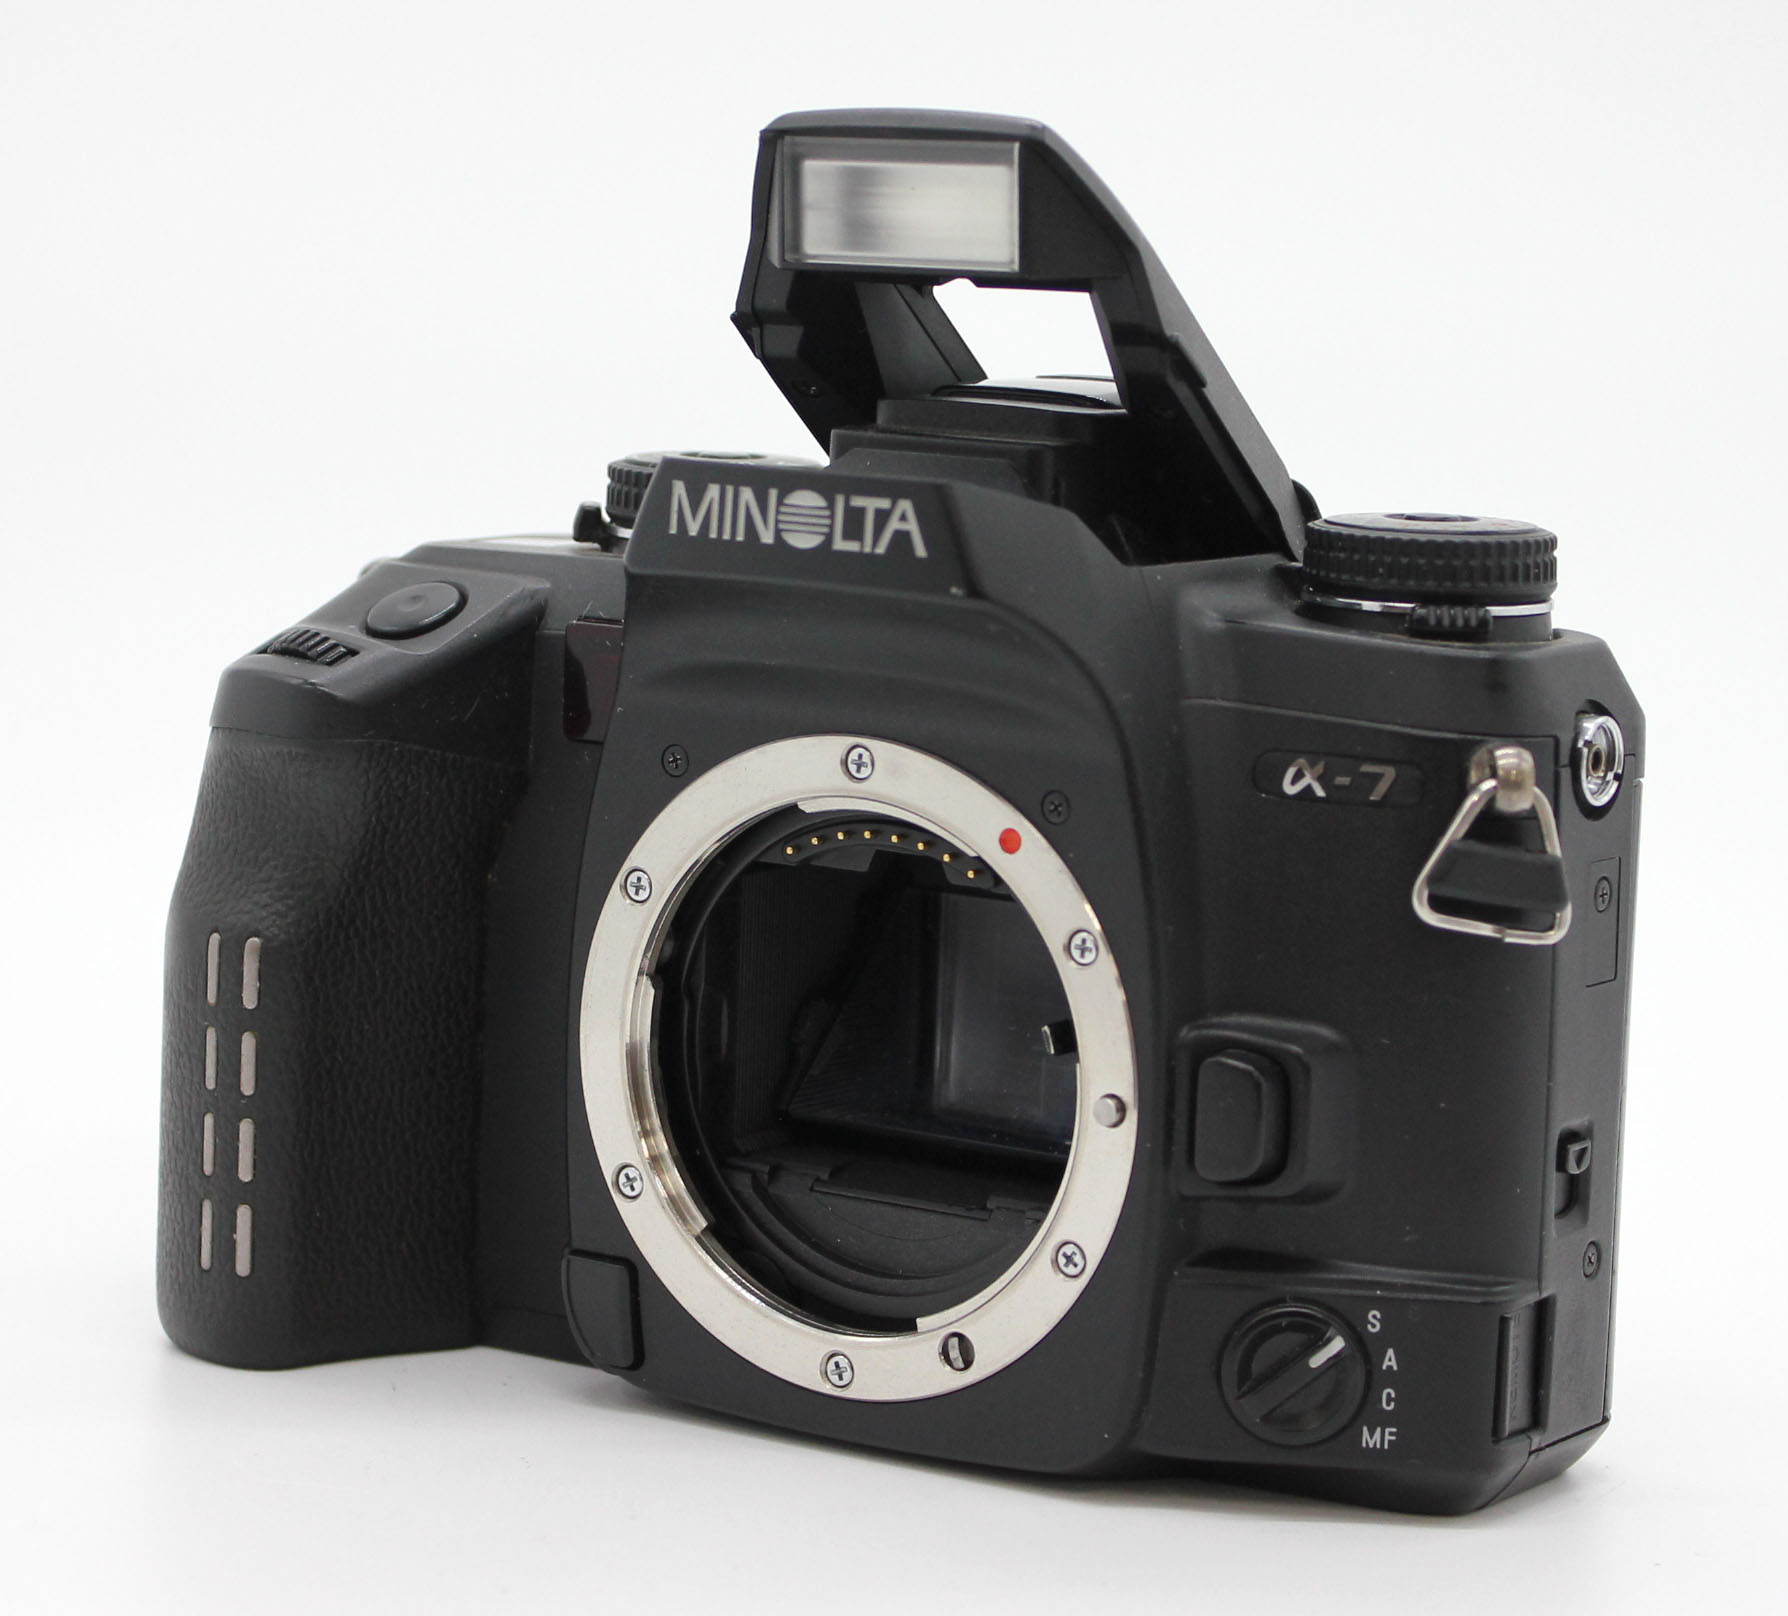  Minolta Maxxum 7 Dynax 7 a7 with AF Zoom 35-105mm F/3.5-4.5 from Japan Photo 1